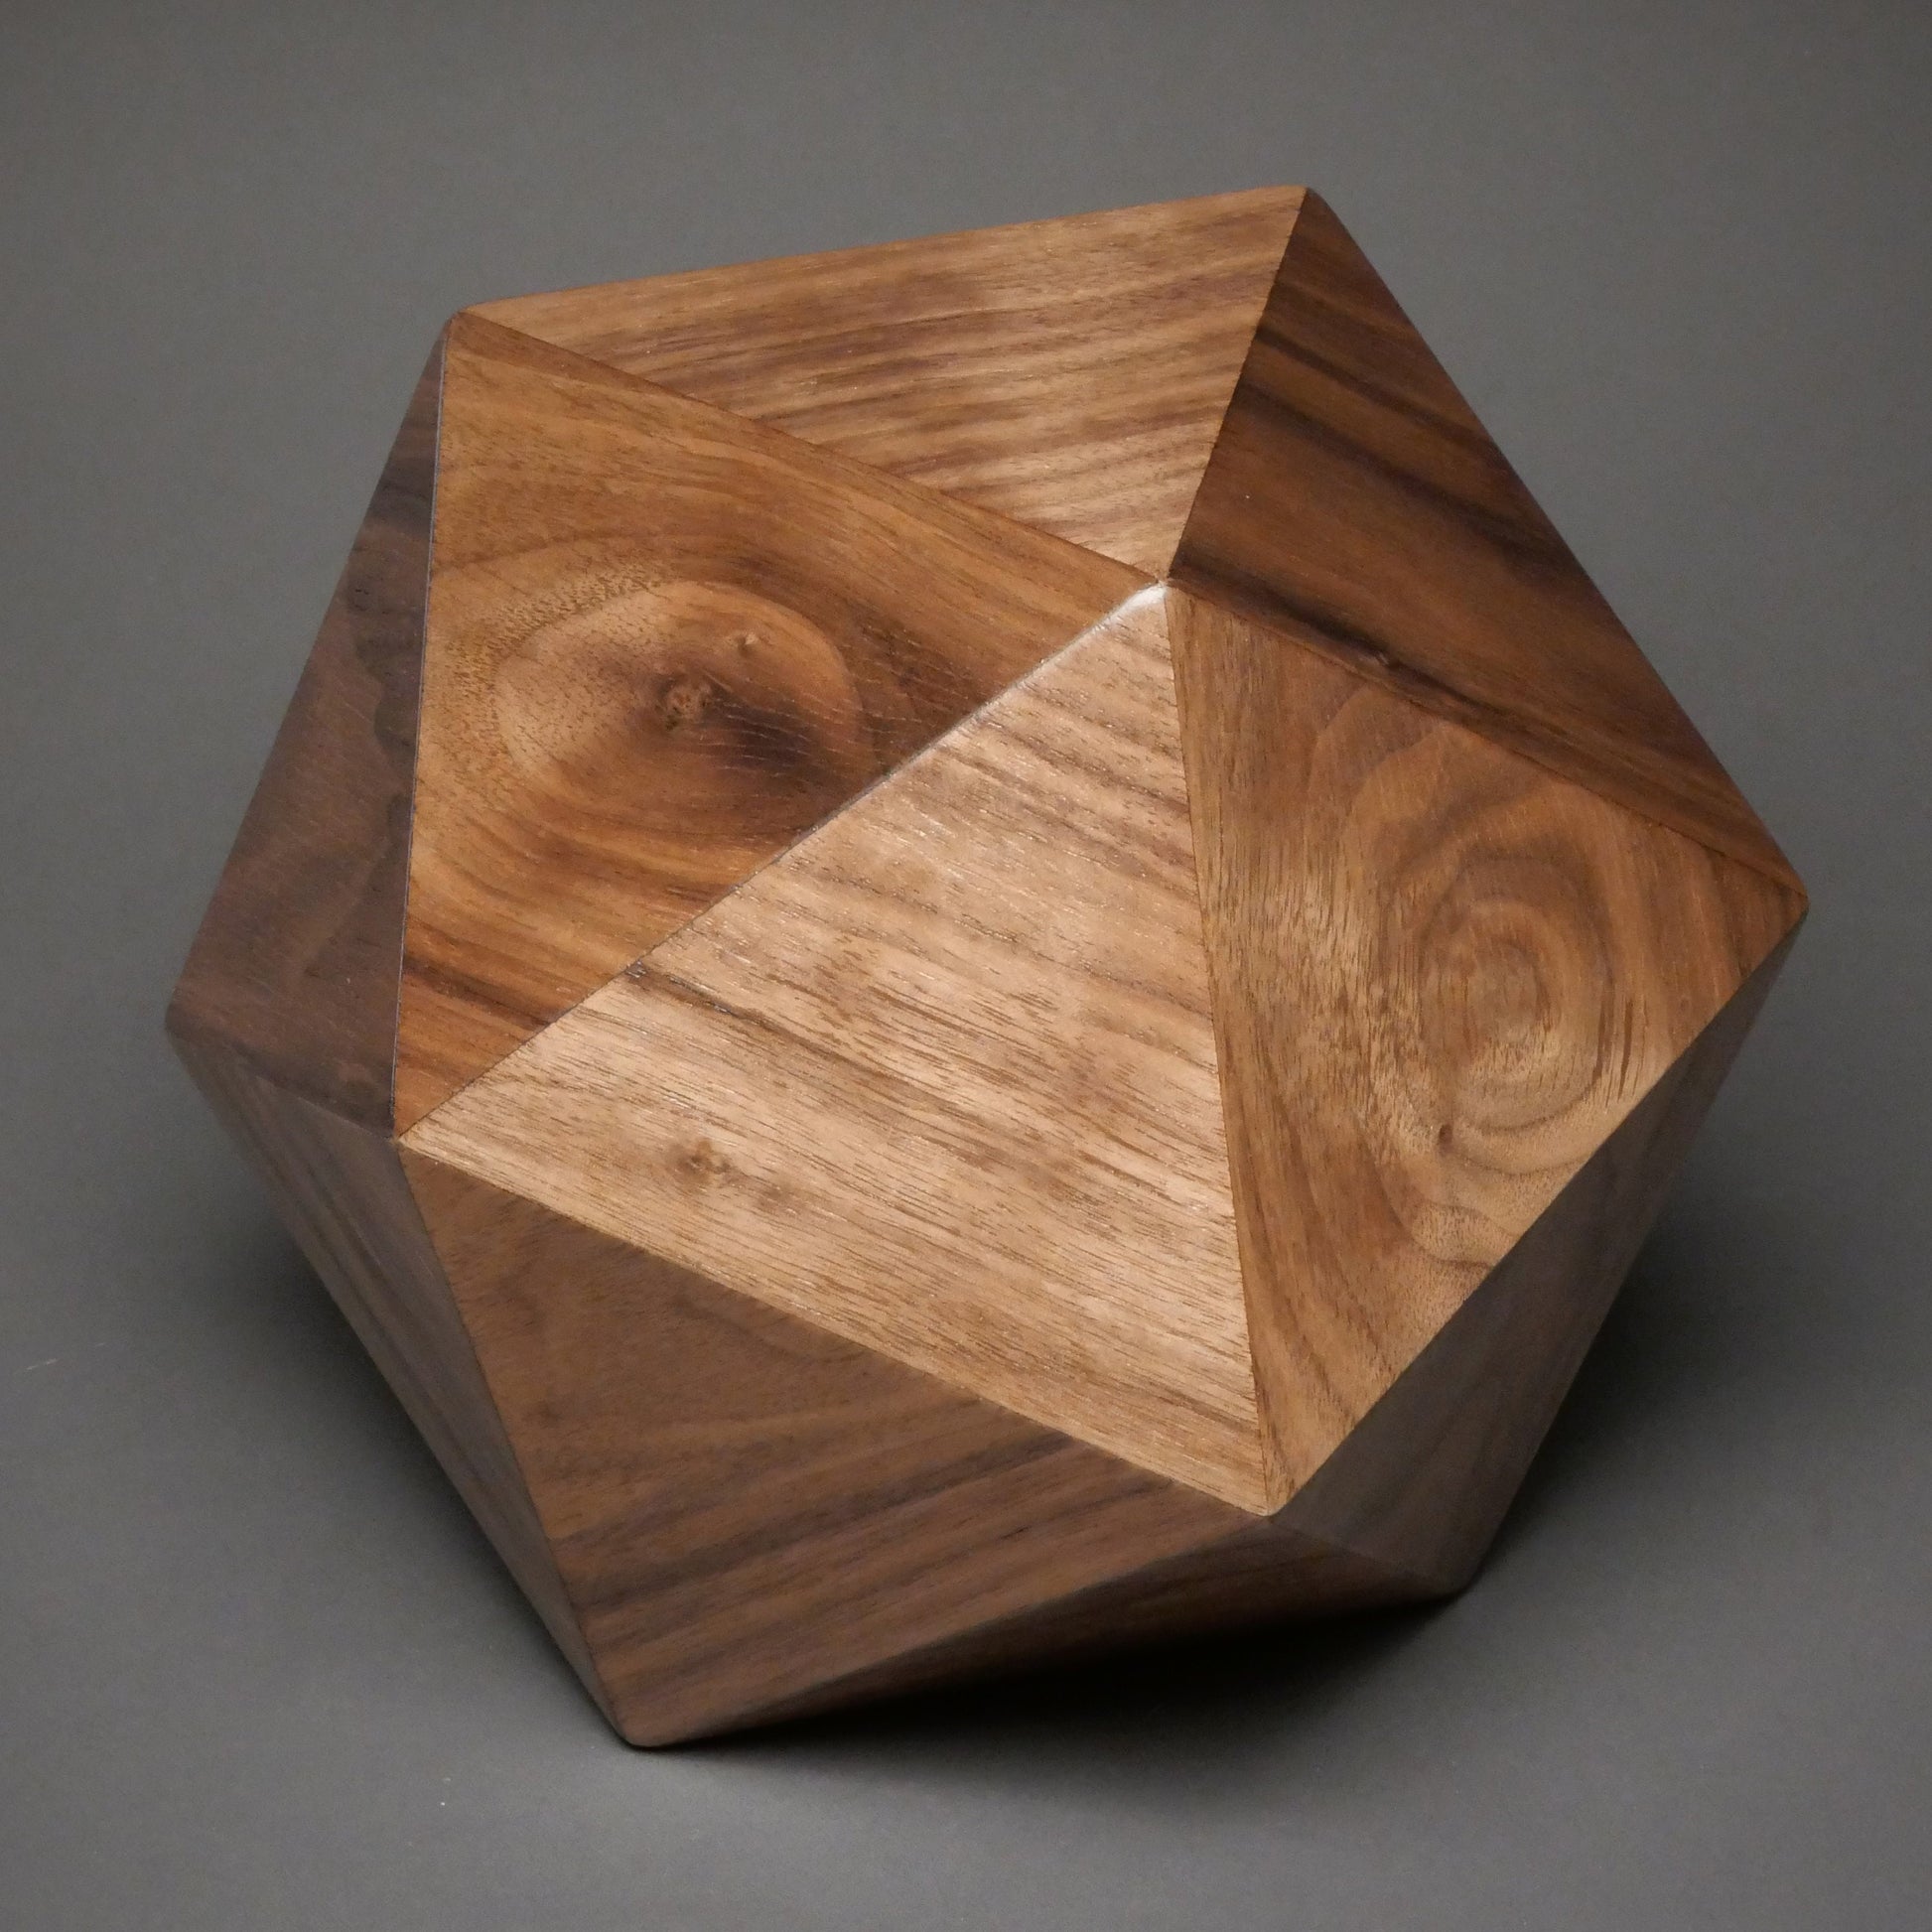 Unique Wood Cremation Urn for a Small Human or Pet up to 125 pounds, Original Design